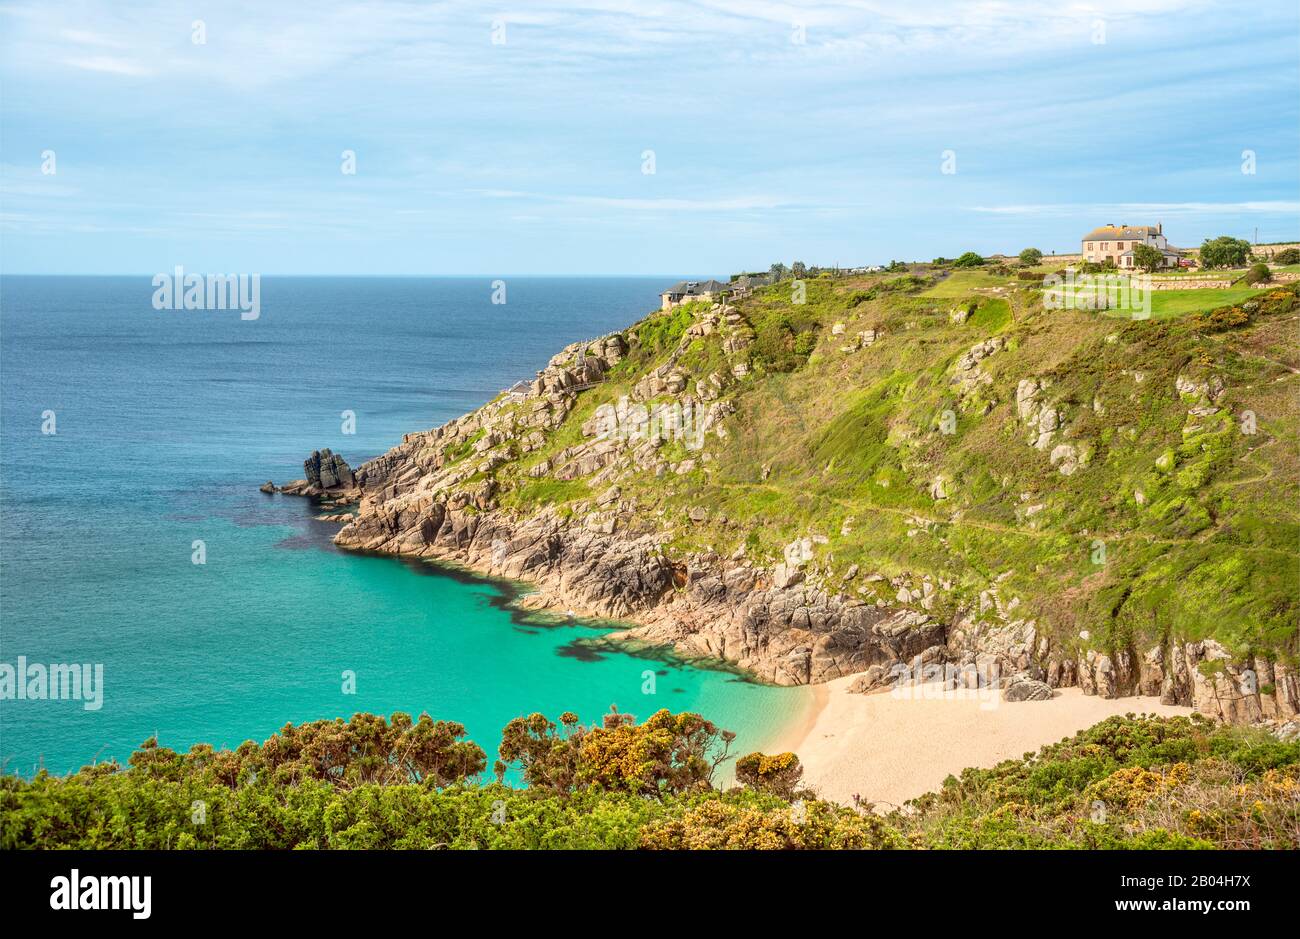 View Over Porthcurno Beach At Minack Open Air Theatre Cornwall England Uk 2B04H7X 